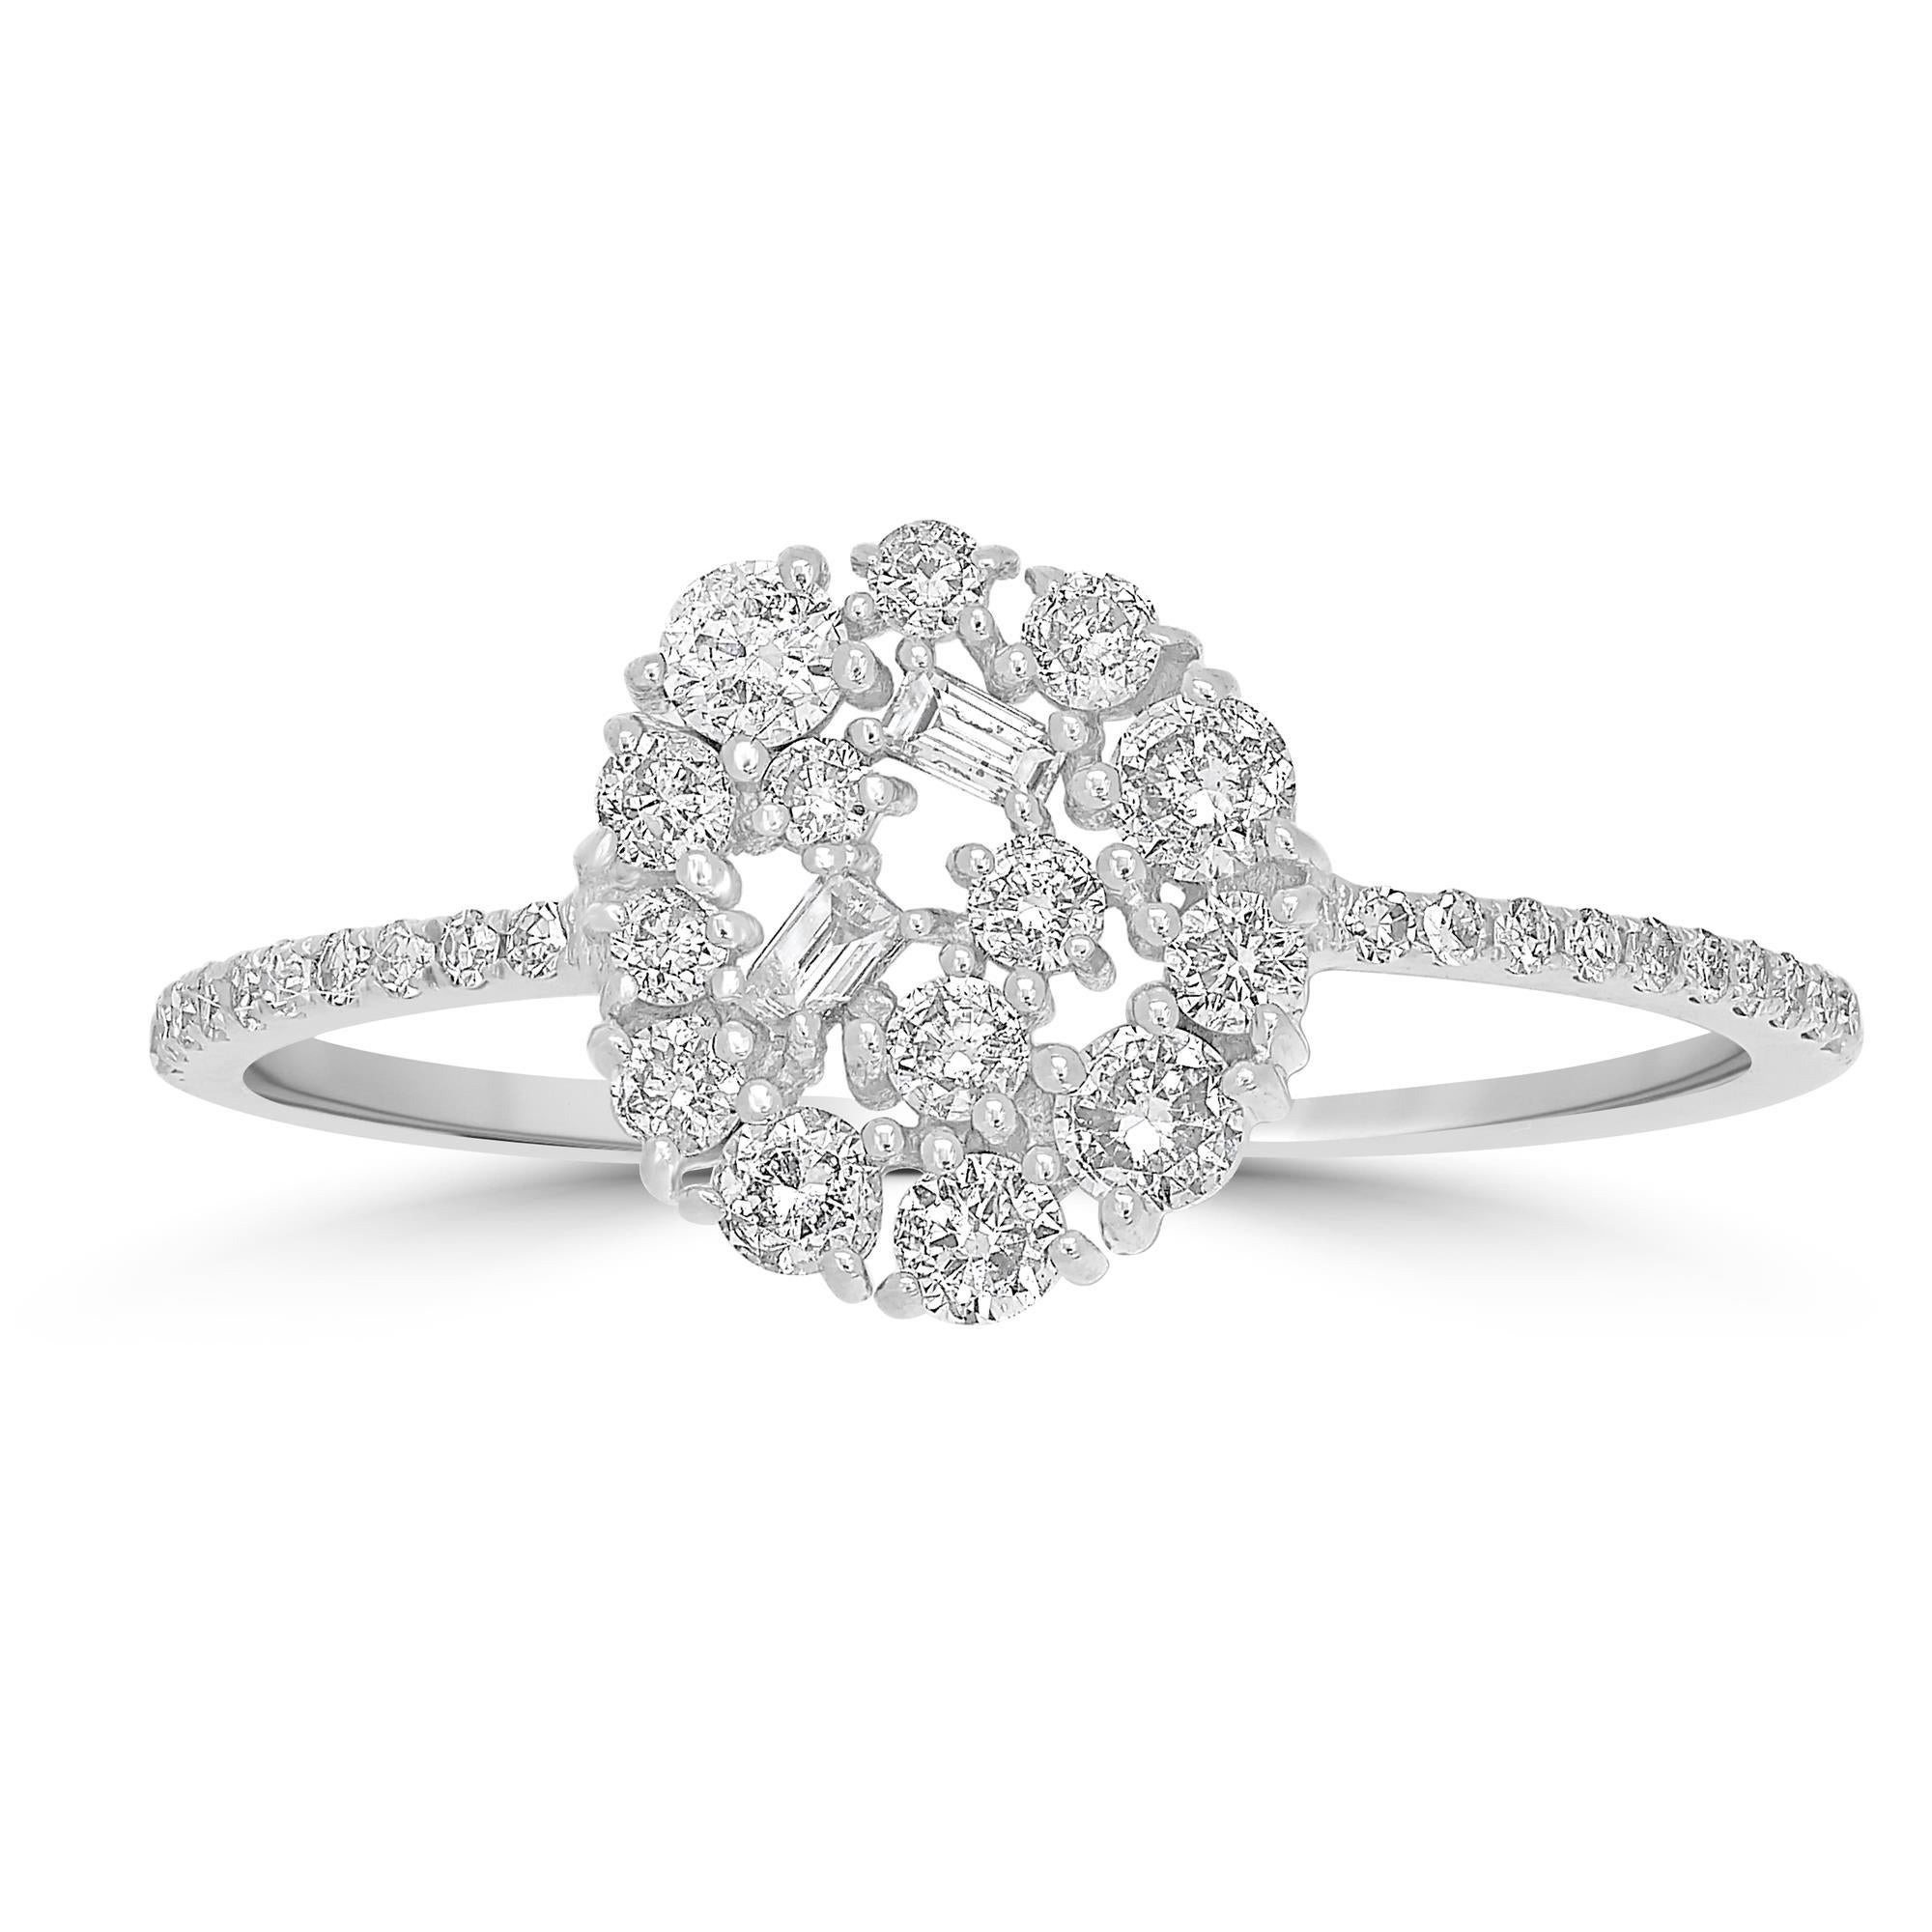 For Sale:  Luxle 3/8 Carat T.W. Diamond Cluster Ring in 14k White Gold 2